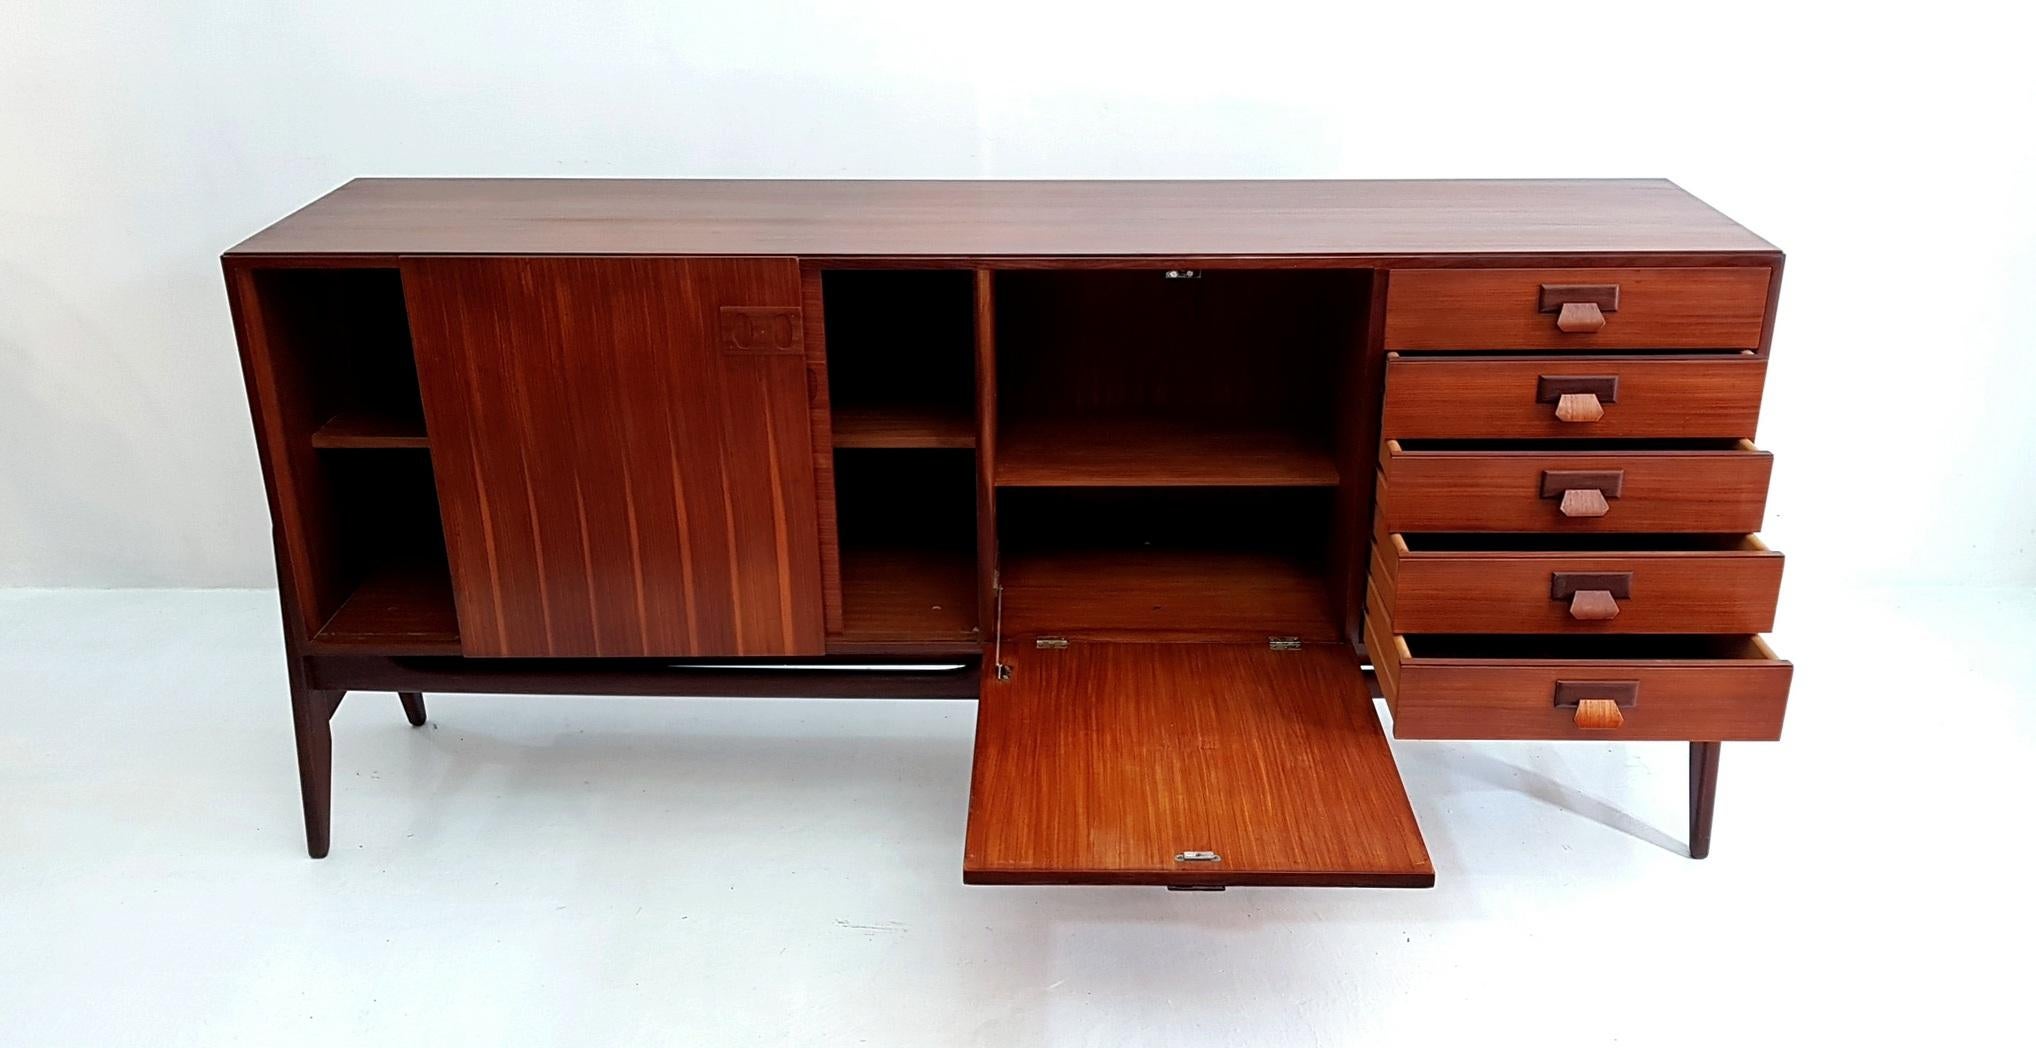 This credenza in teak was made by Frattelli (brothers) Proserpio in the 1960s in the factory that is running to this day. The credenza is resting on a stand without any screws or attachments and is yet stabile. There are two sliding doors, a dry bar